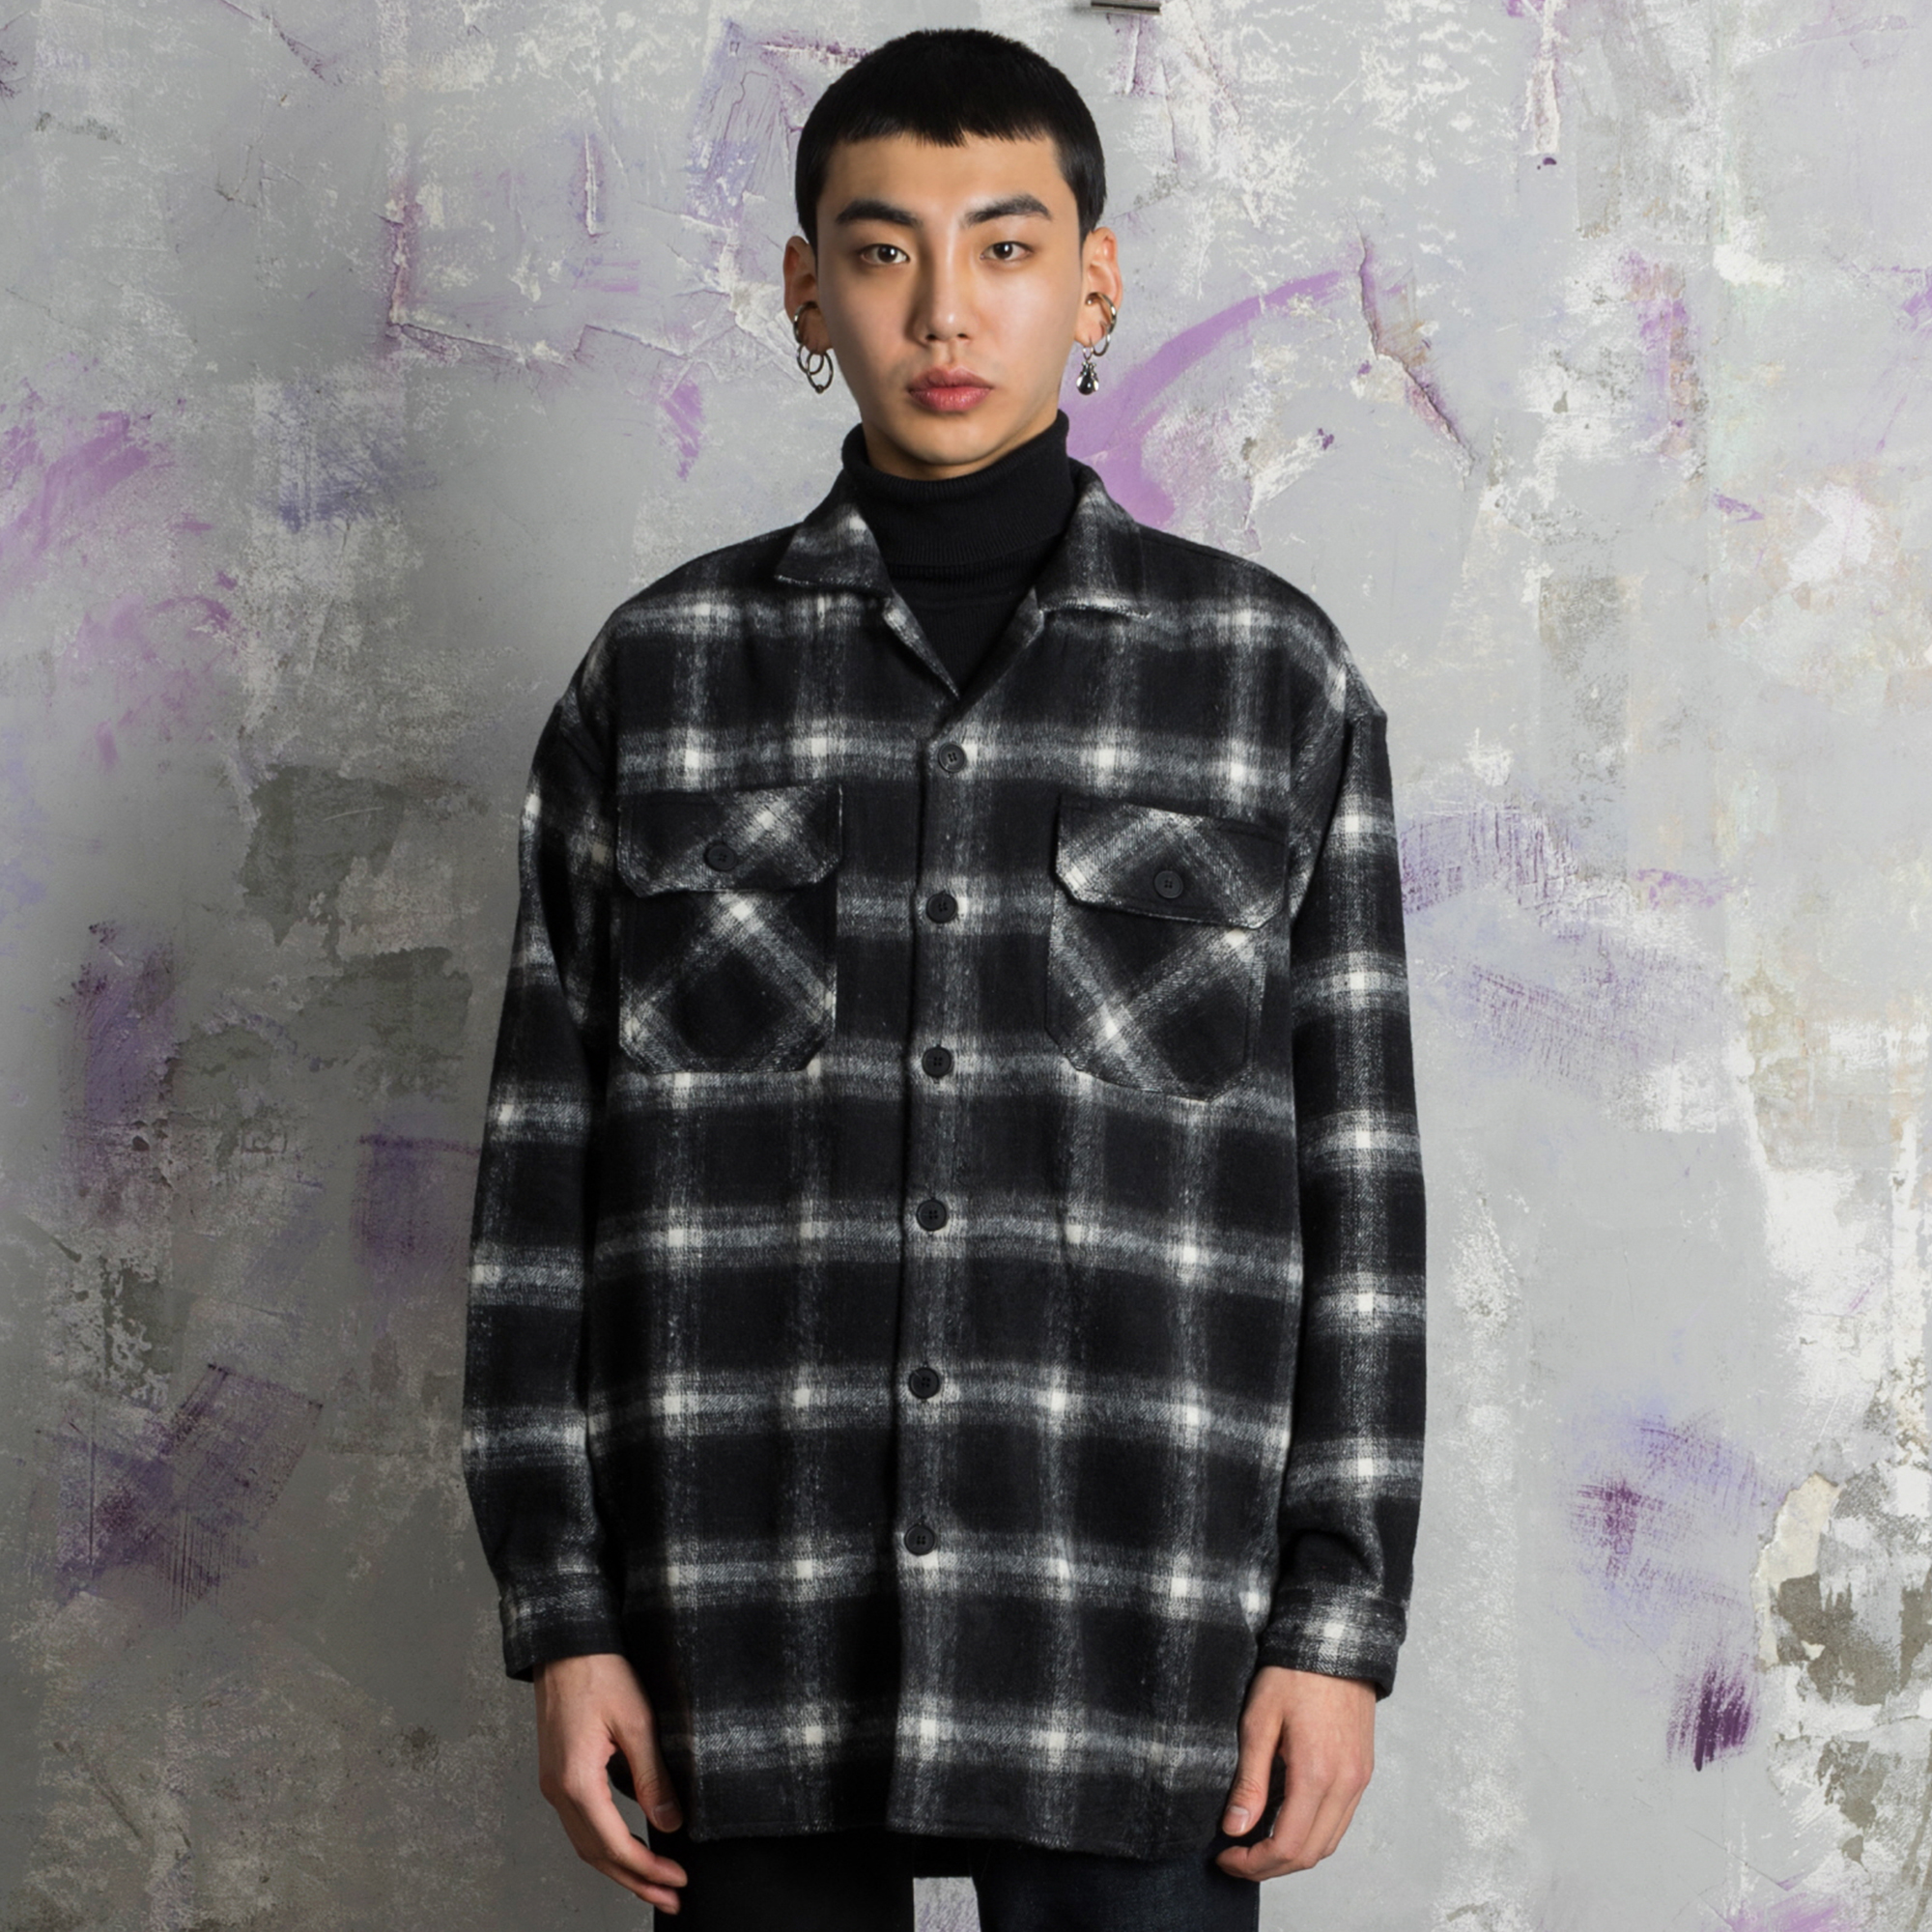 Archive HEAVYweight flannel shirts (black)